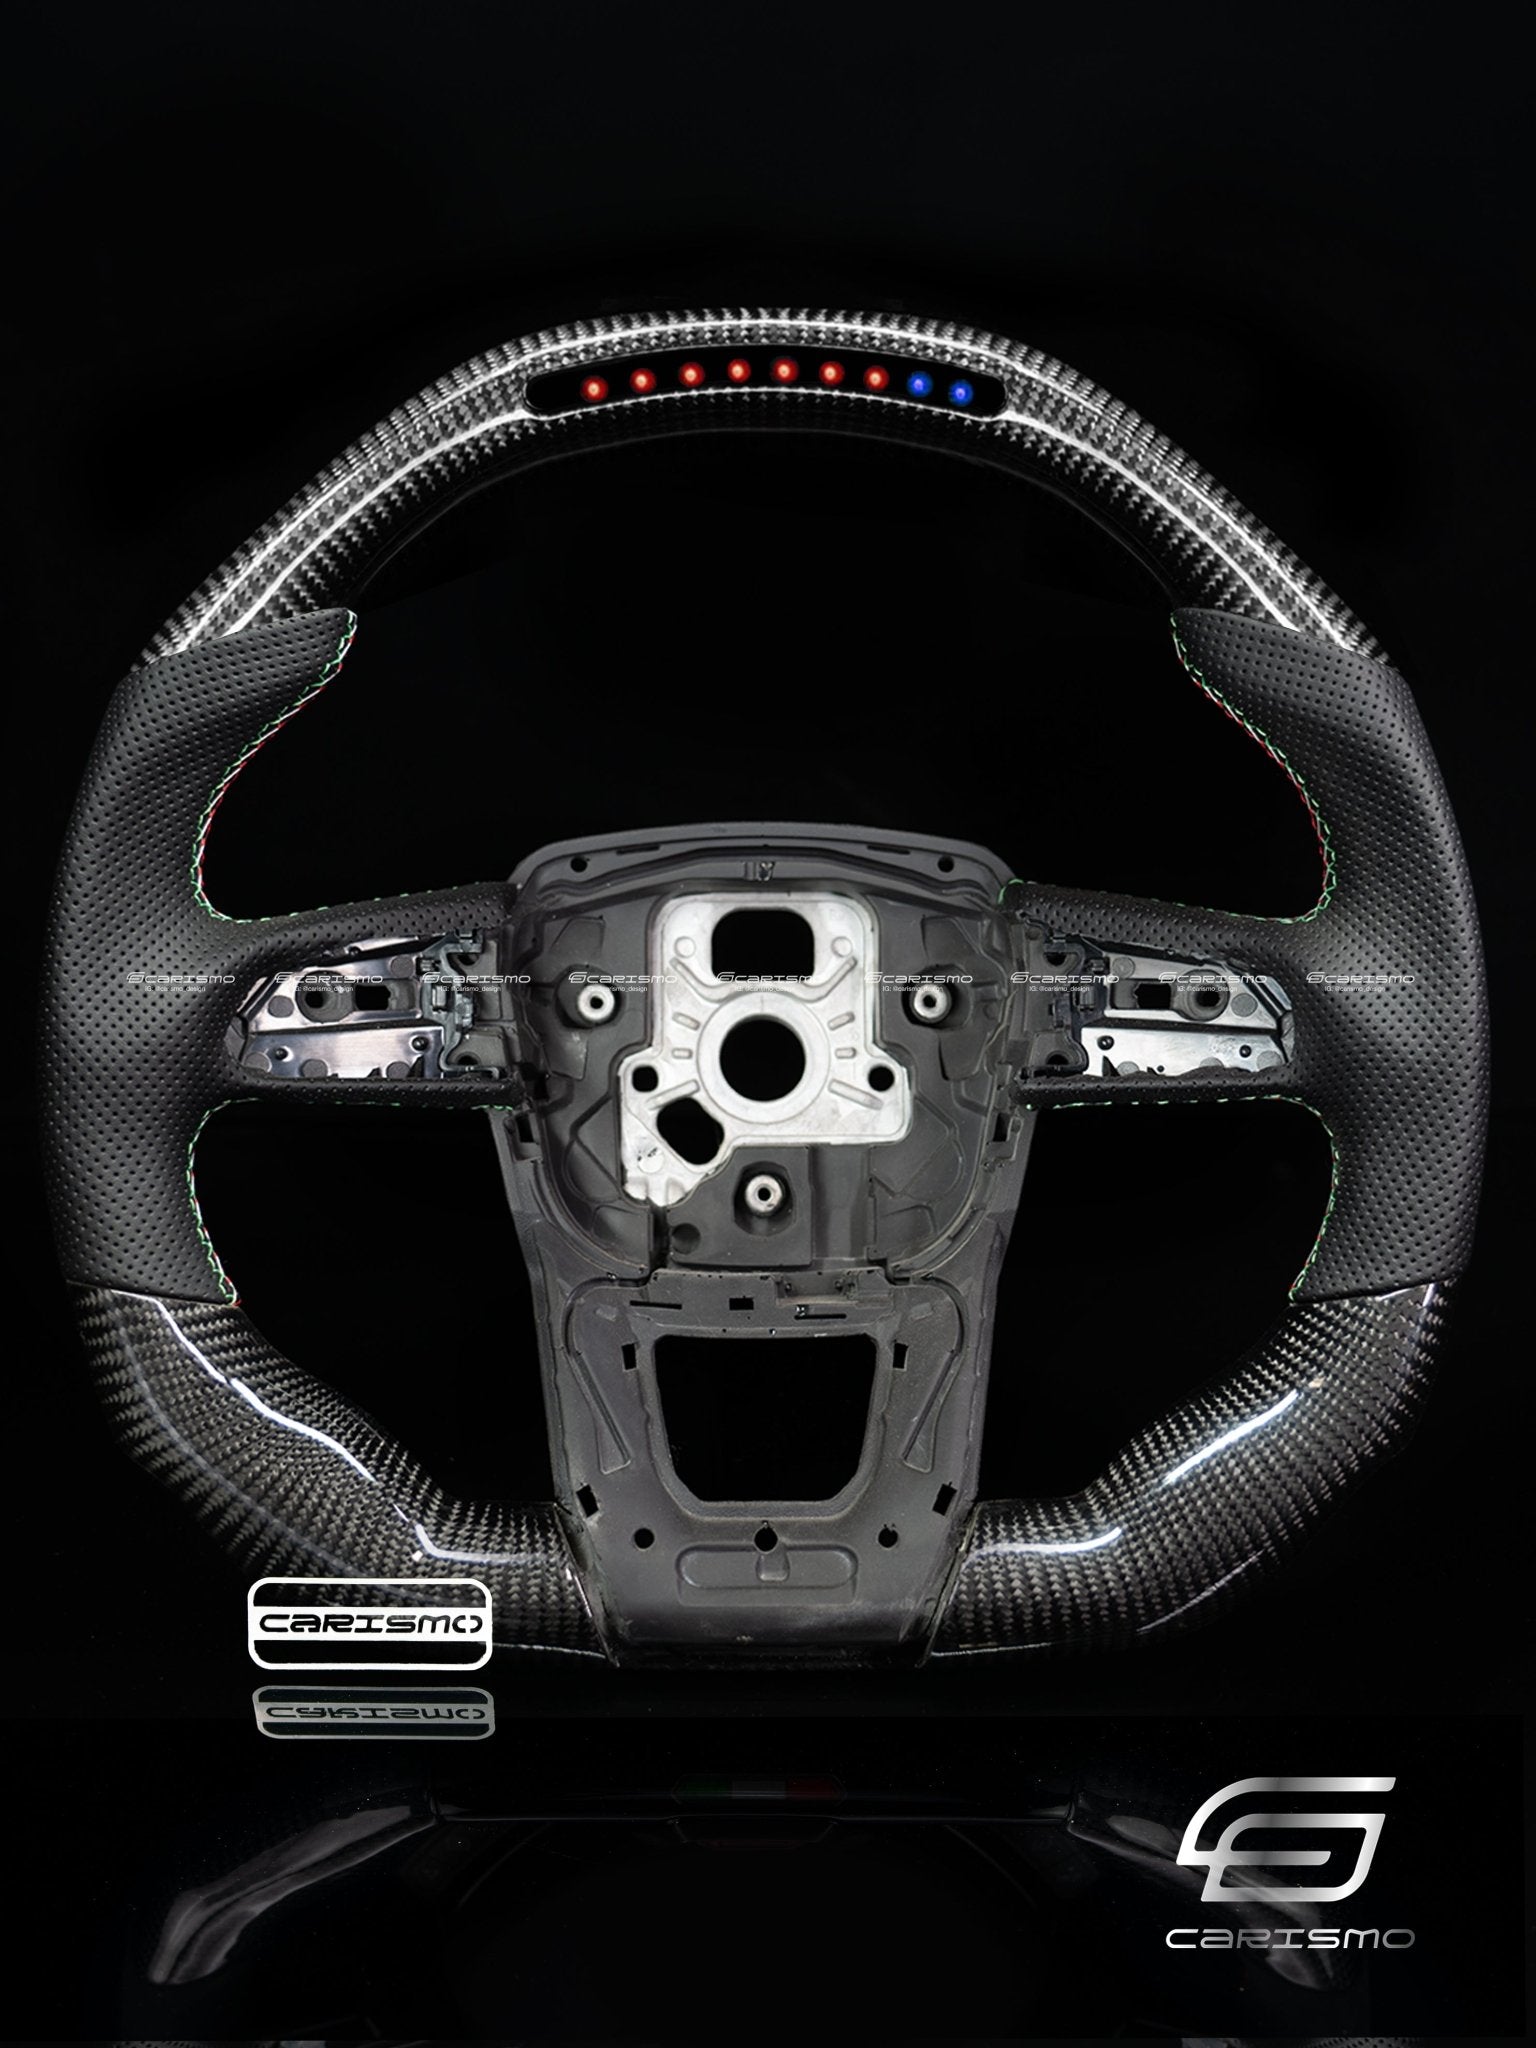 Carismo Steering Wheel For Lamborghini Urus - Sequential RPM LED - Gloss Carbon - Perforated Leather - Carismo